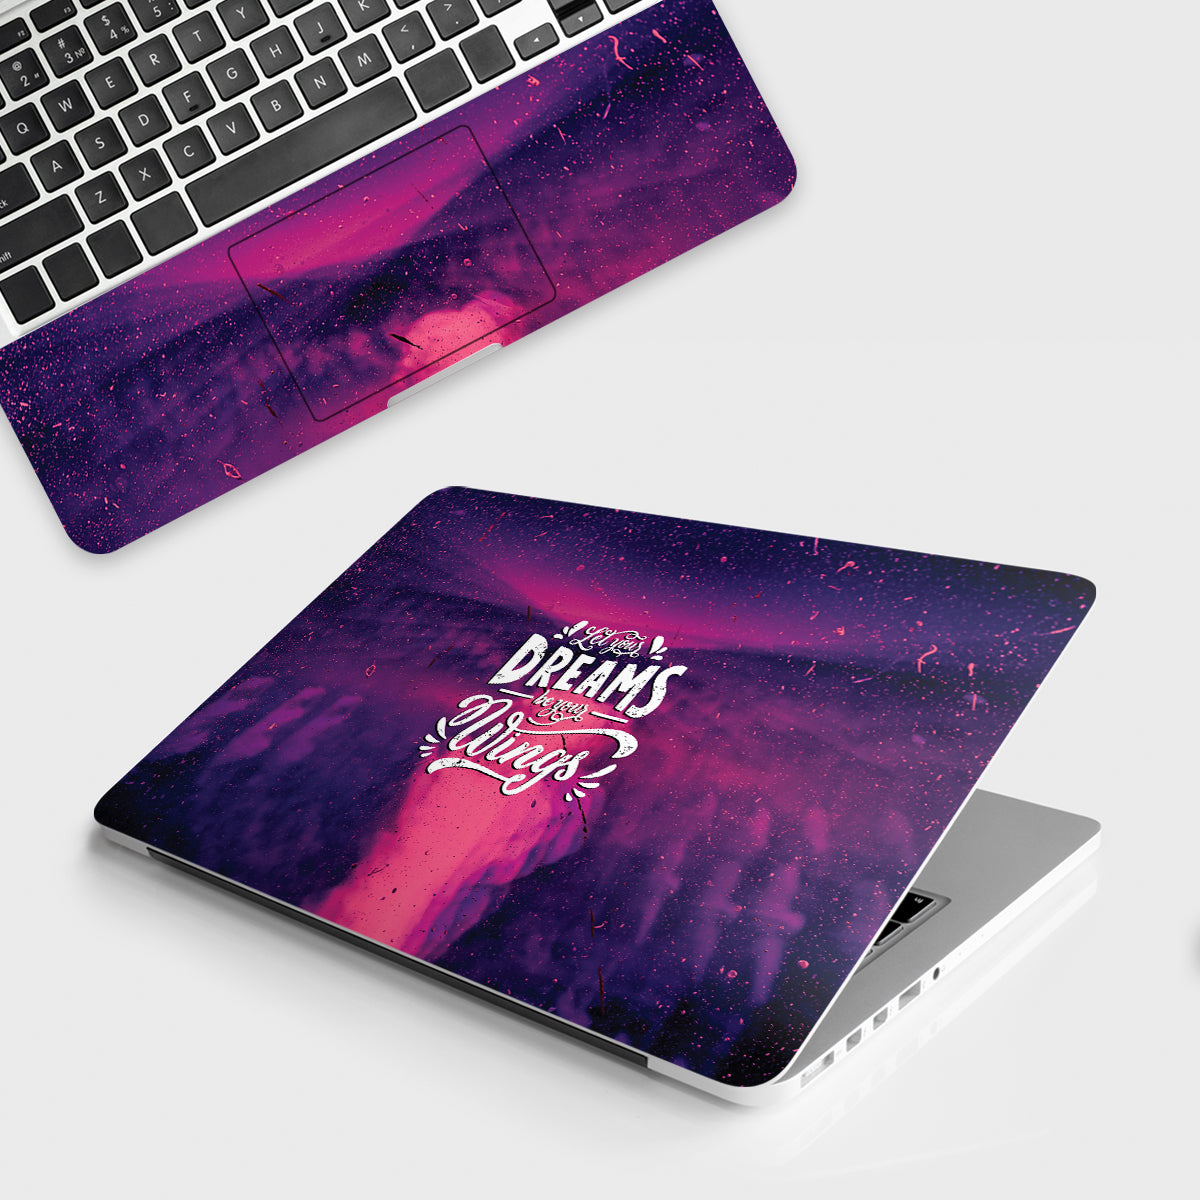 Fomo Store Laptop Skins Quotes Let your dreams be your wings